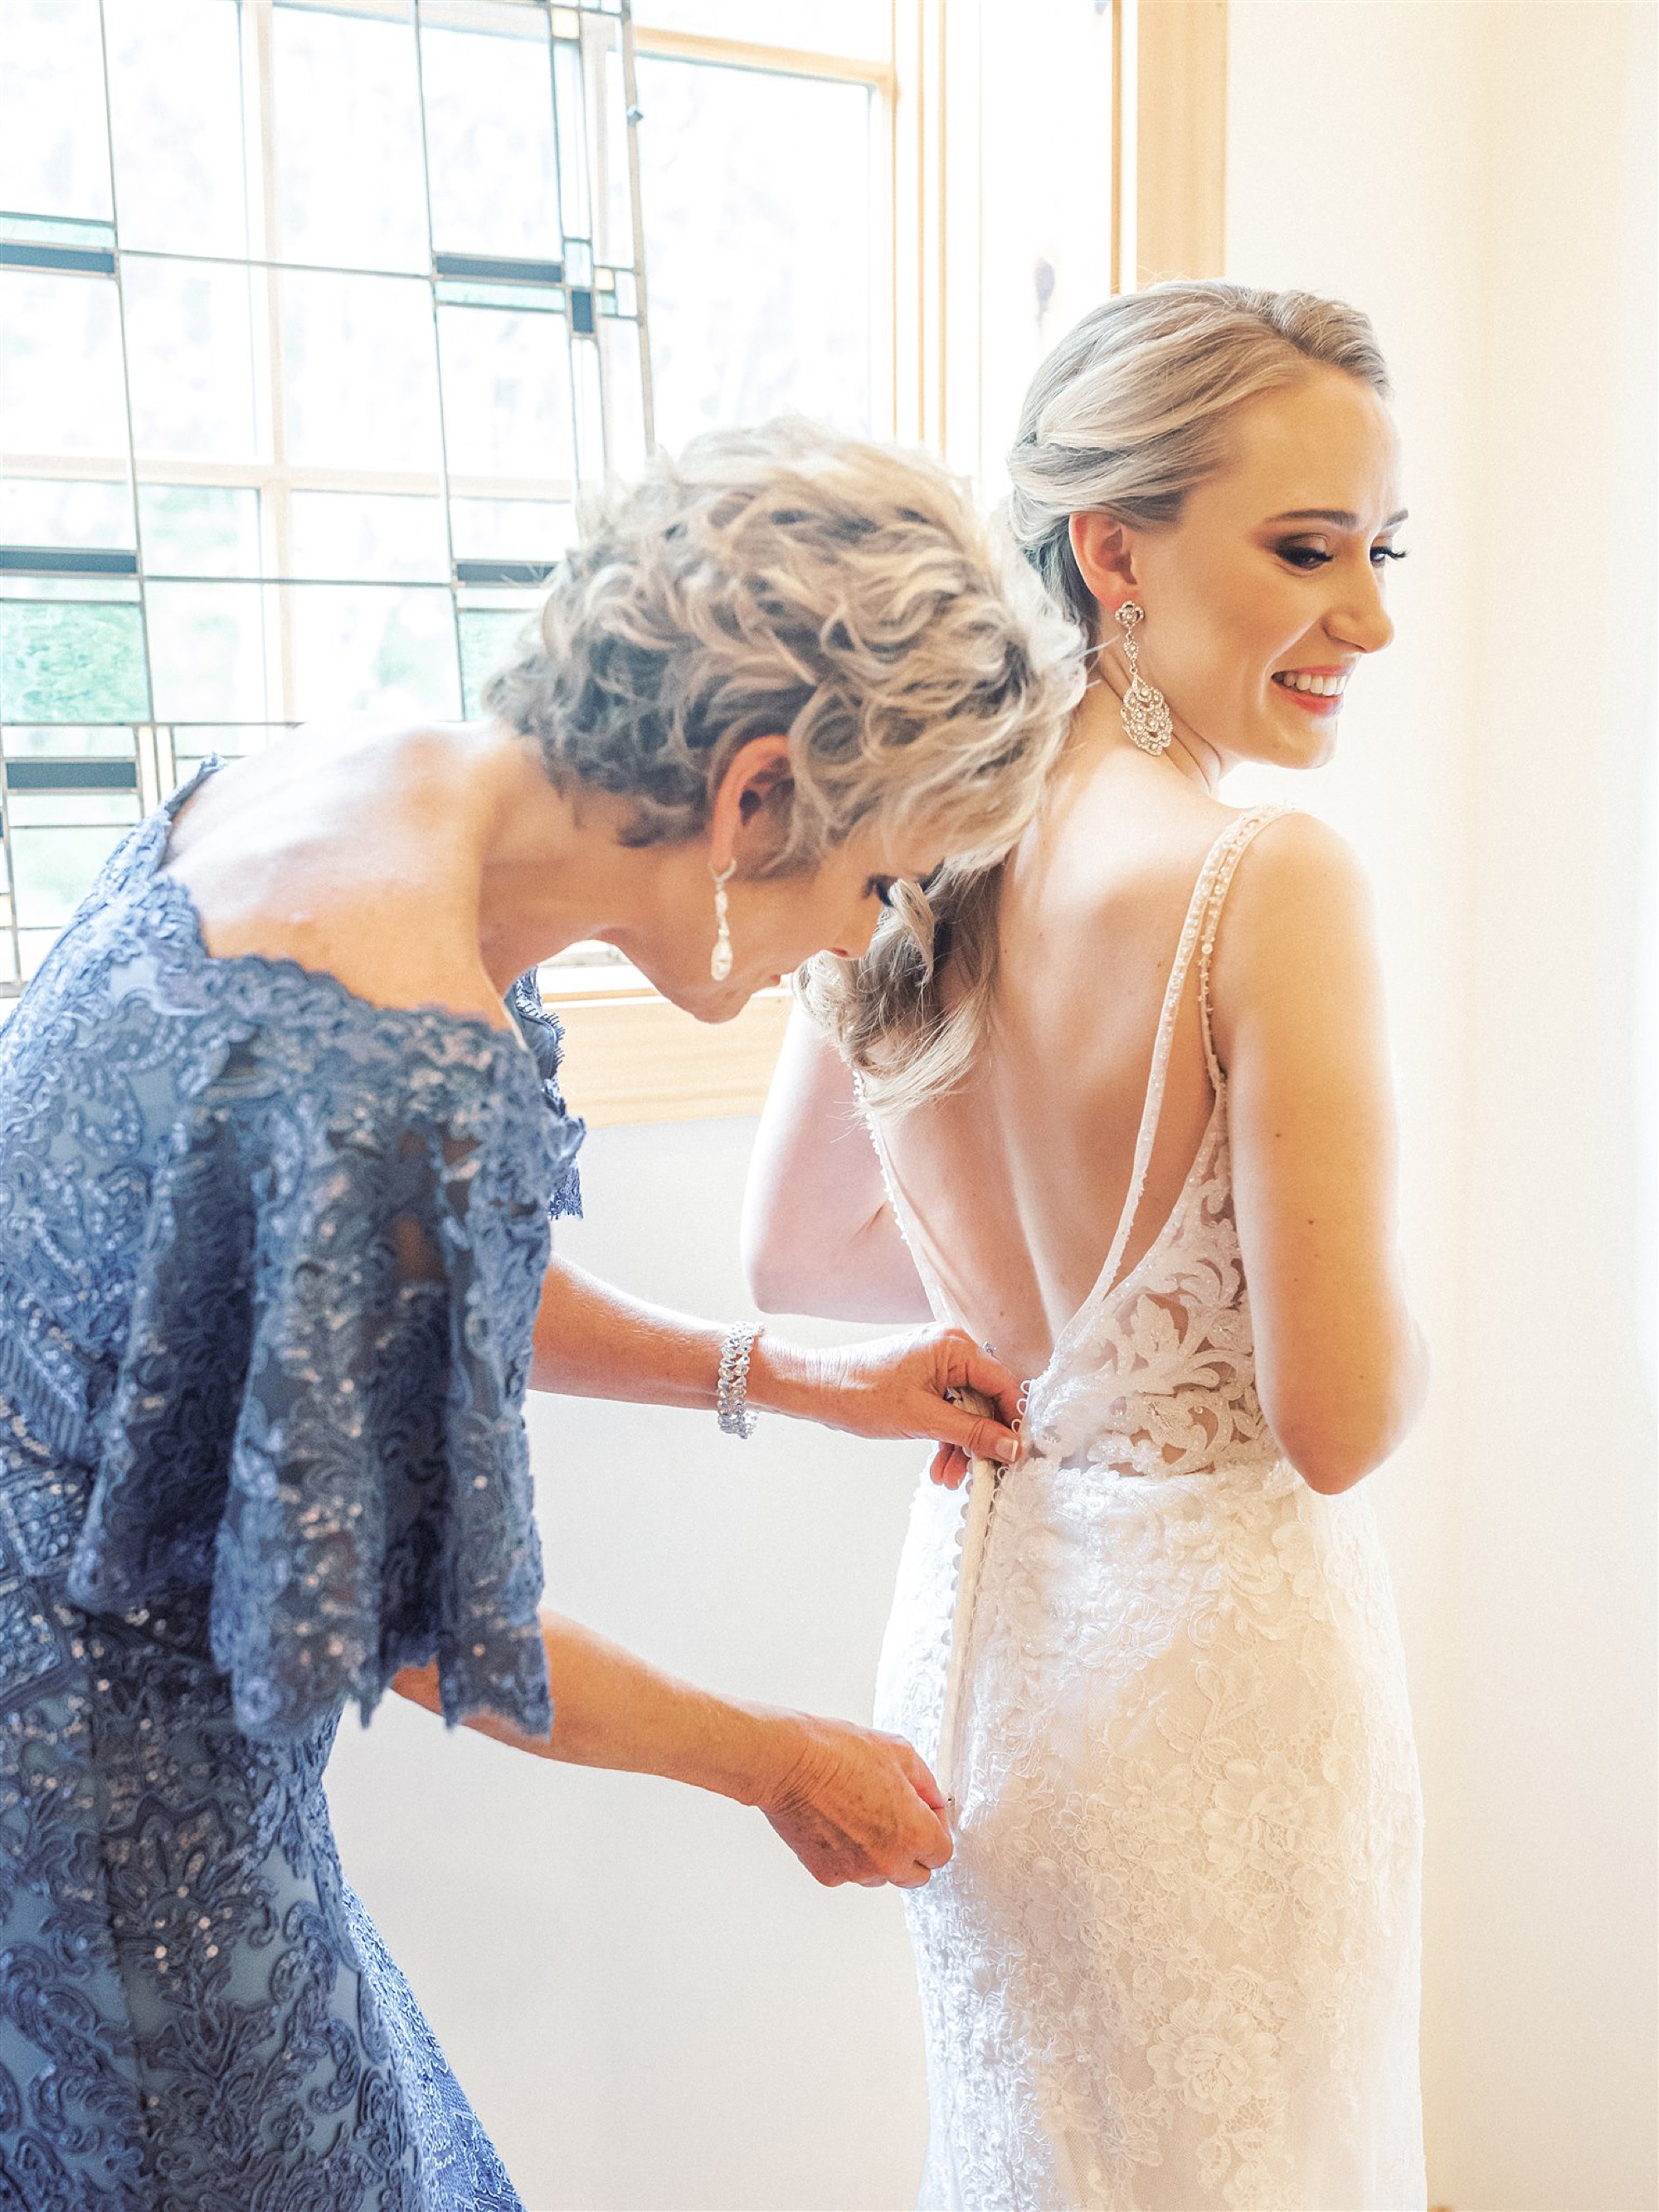 mother of bride helps bride with wedding gown